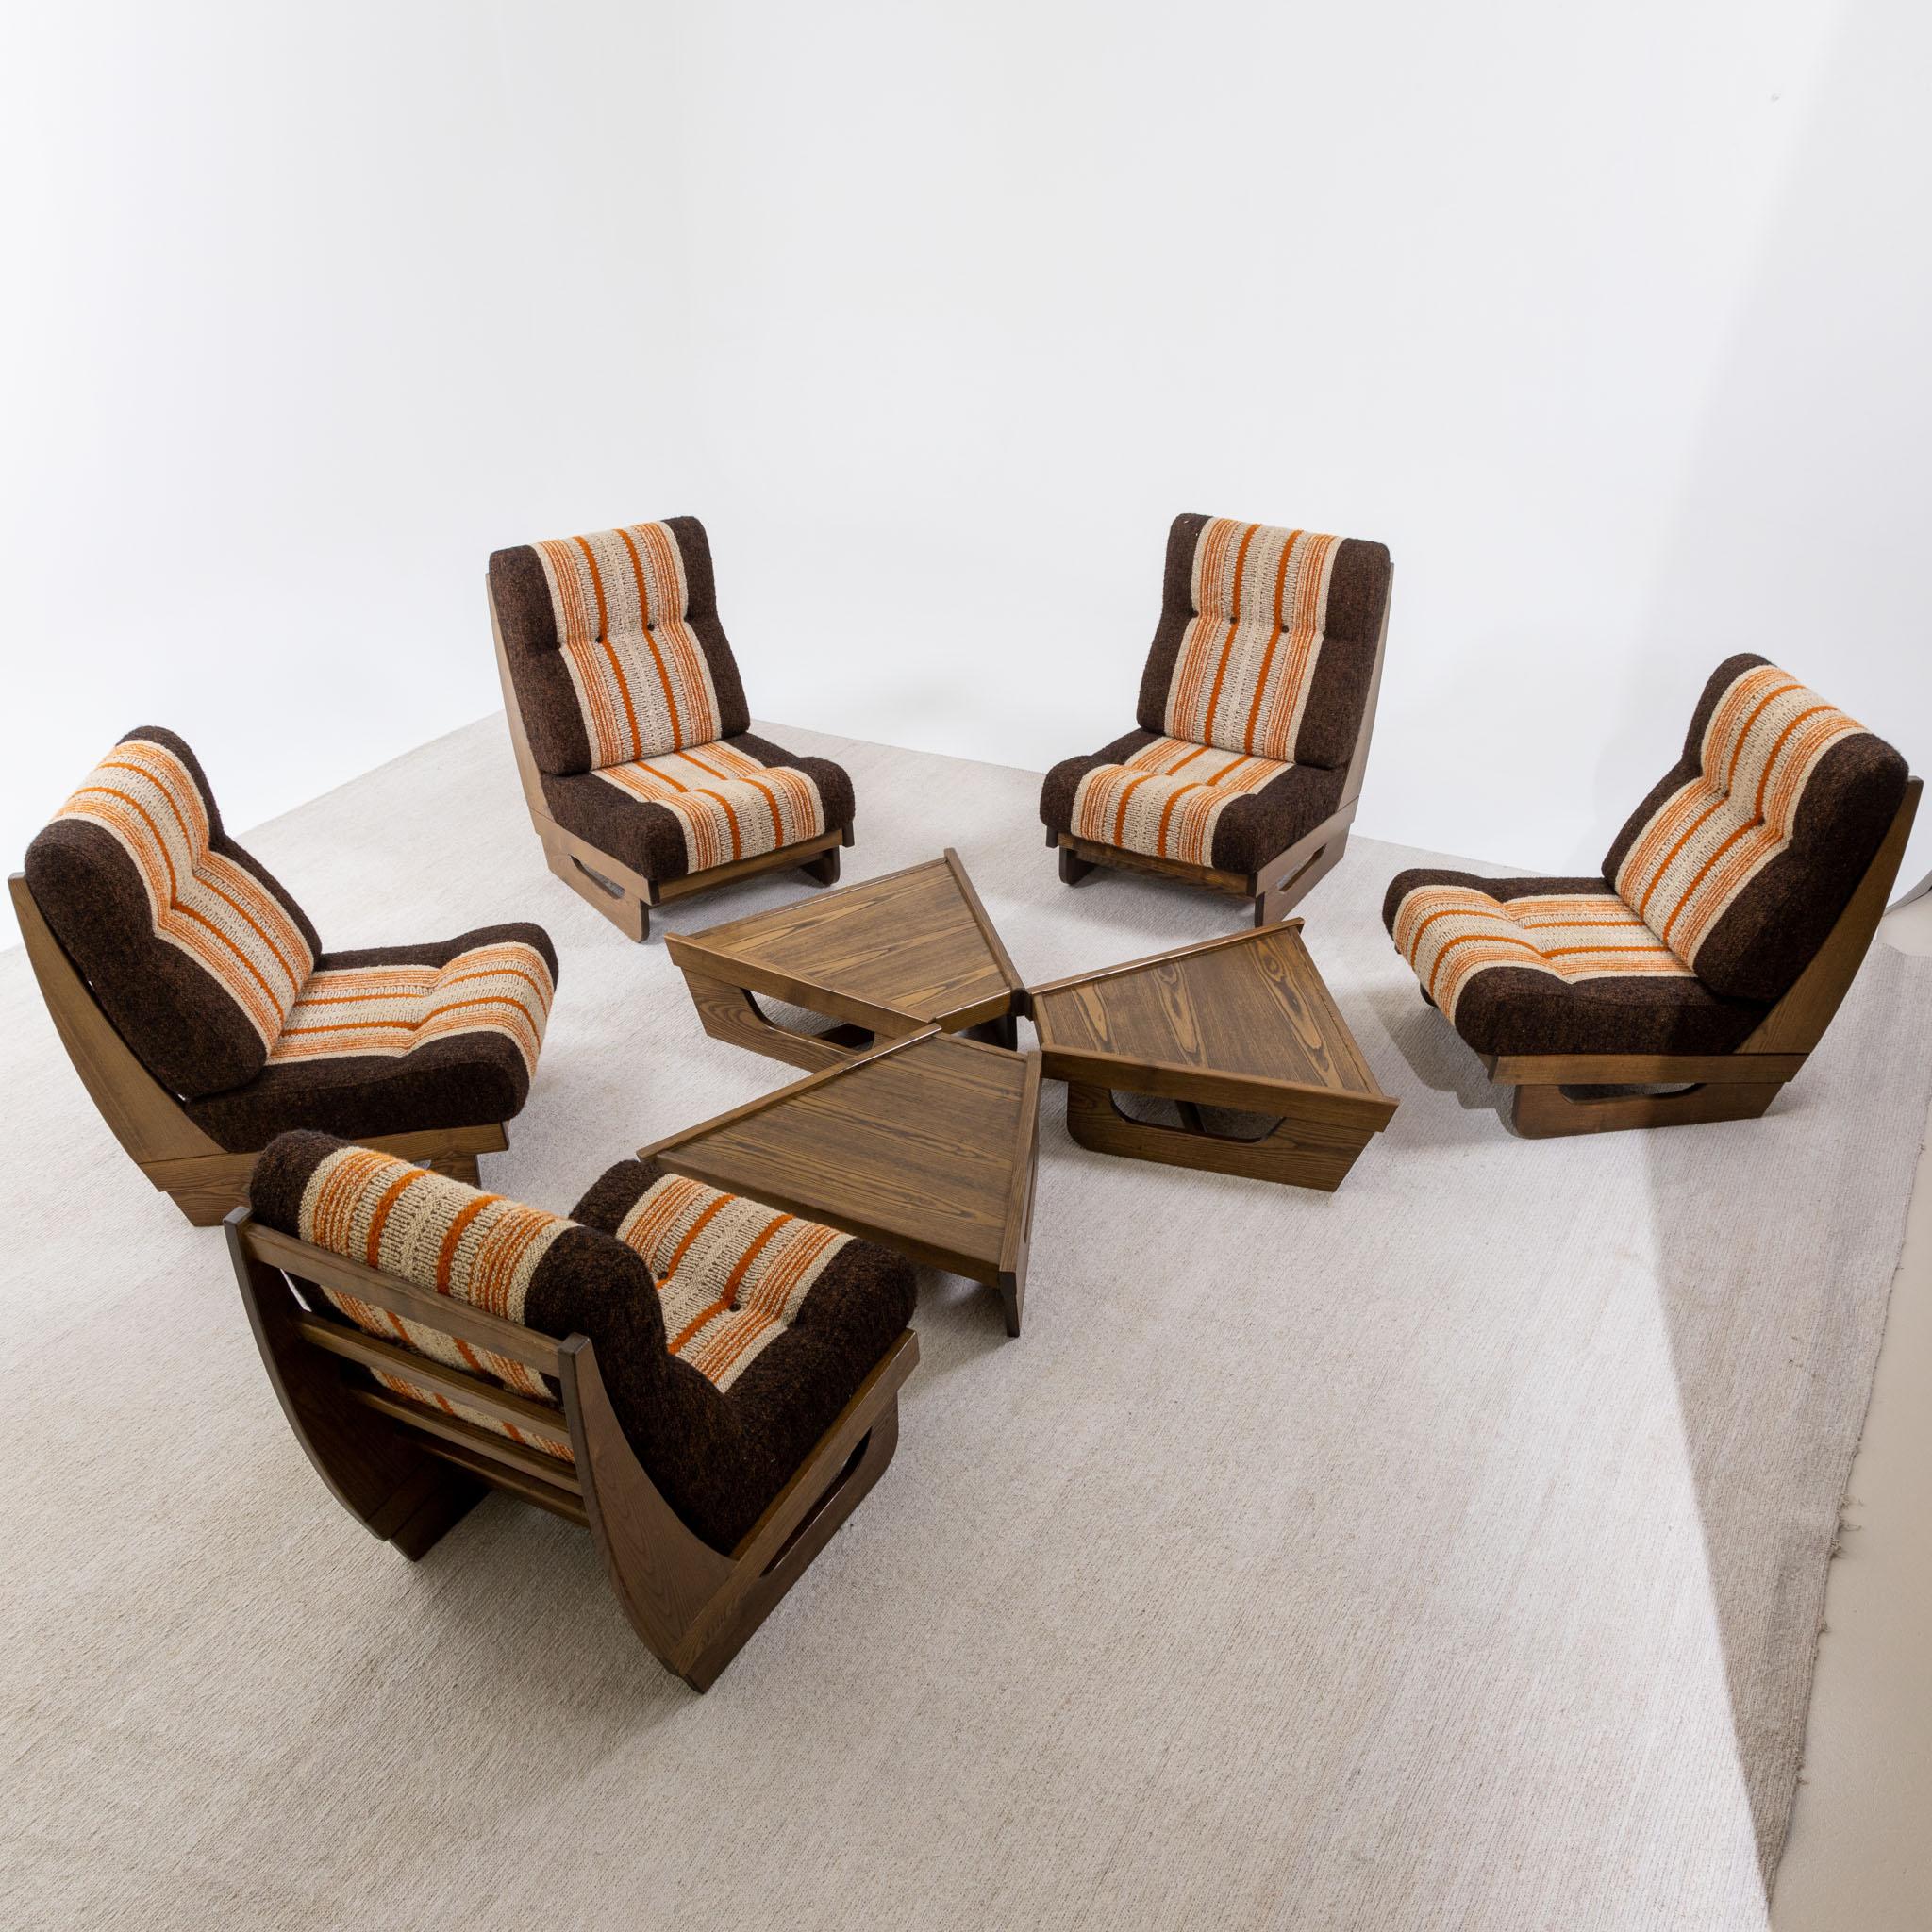 Modular Seating Group with five Lounge Chairs, Italy 1950s For Sale 2